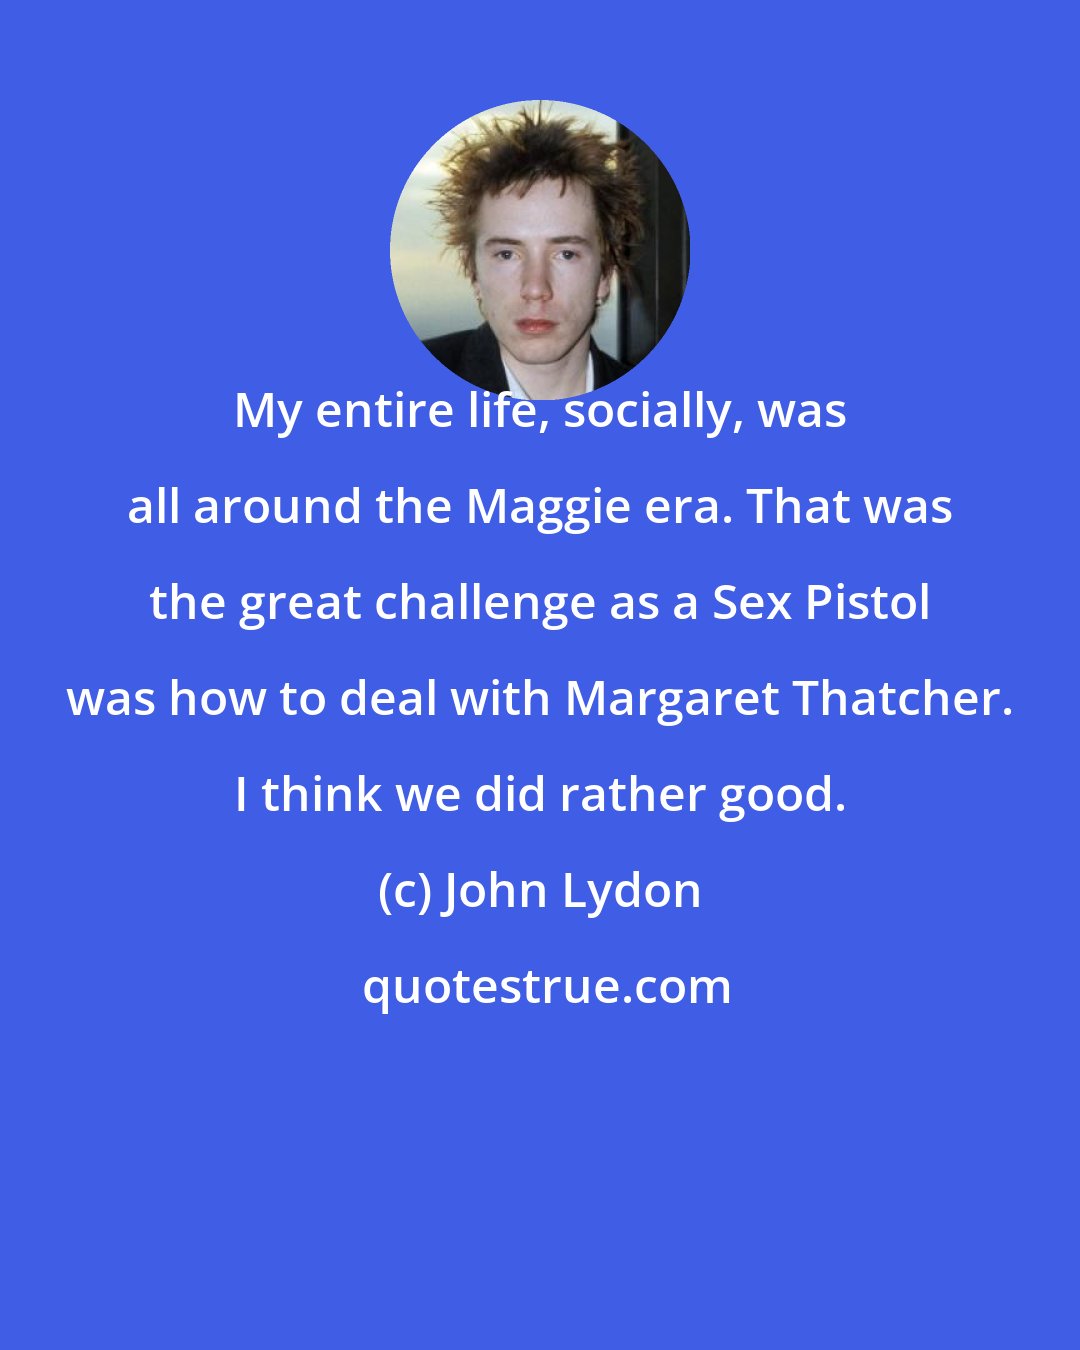 John Lydon: My entire life, socially, was all around the Maggie era. That was the great challenge as a Sex Pistol was how to deal with Margaret Thatcher. I think we did rather good.